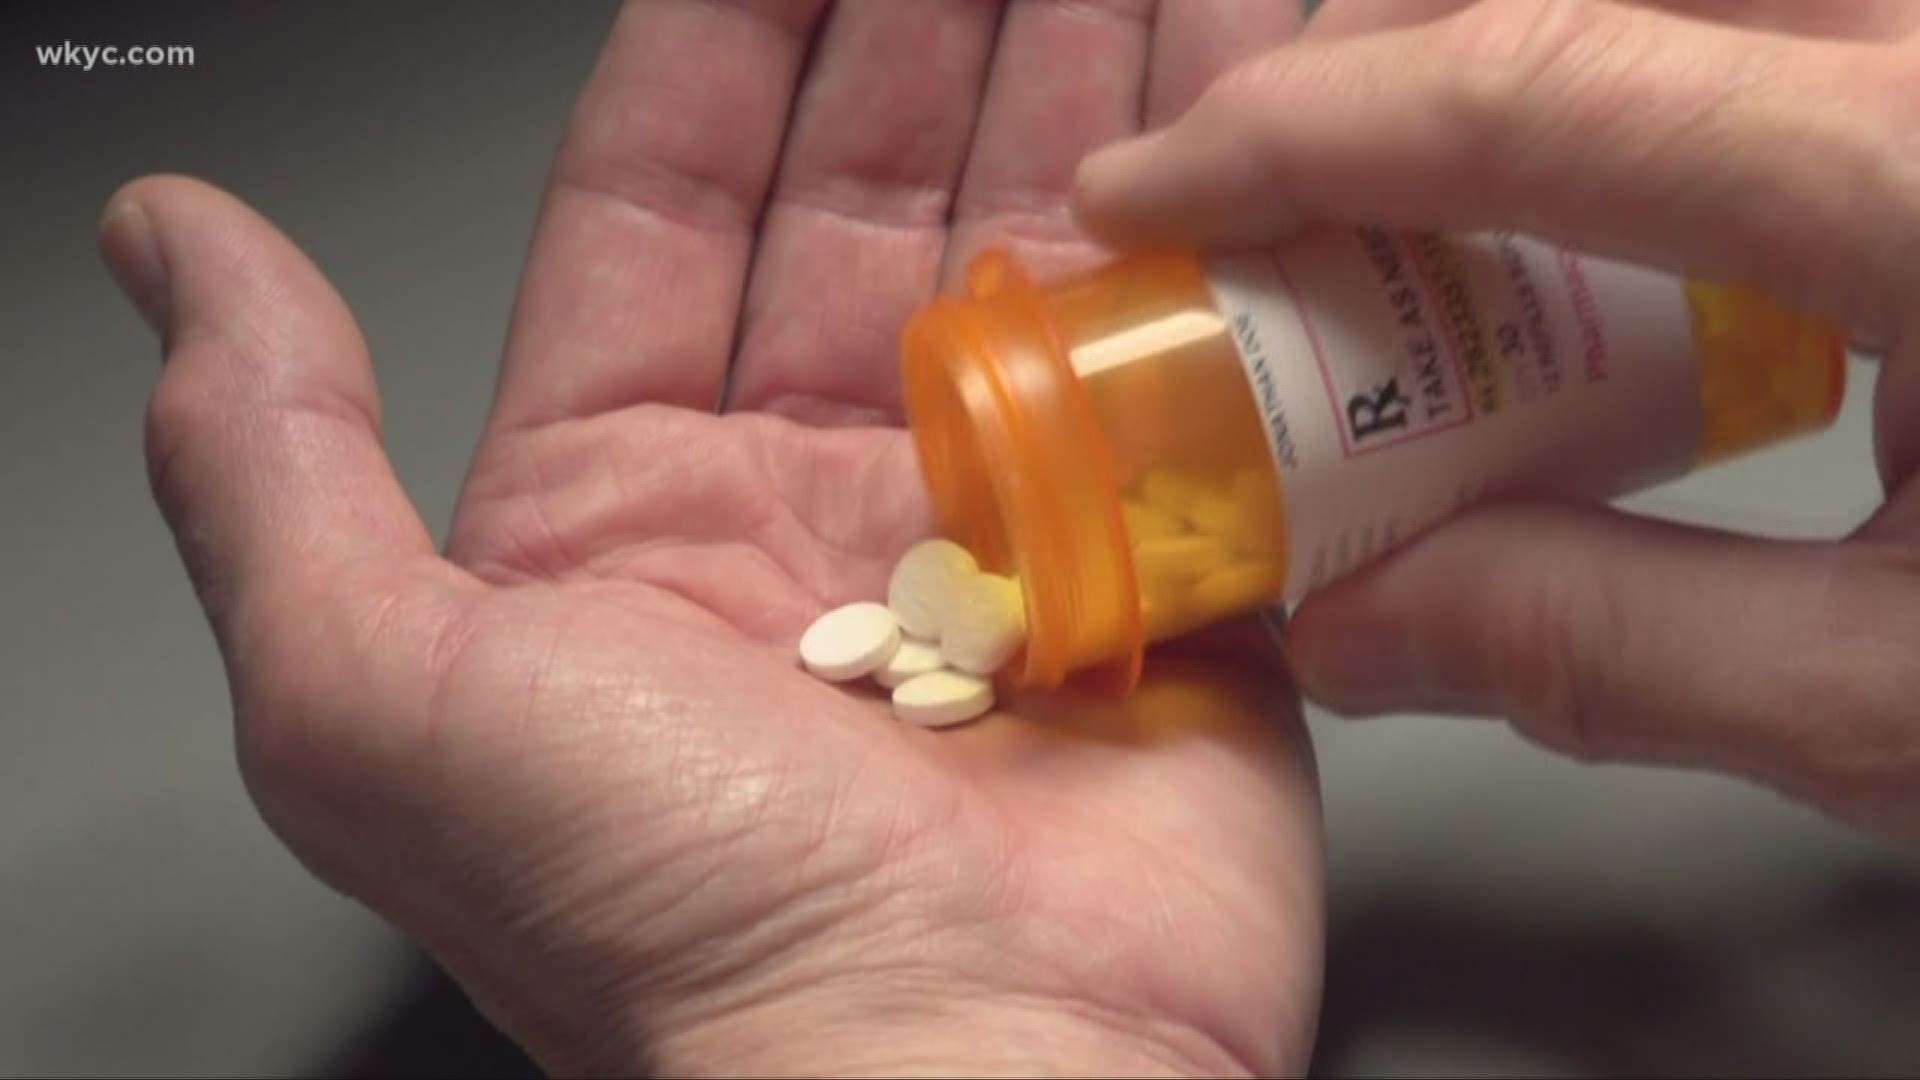 Settlement talks with drug companies reached a standstill Friday. Dorsena Drakeford reports.